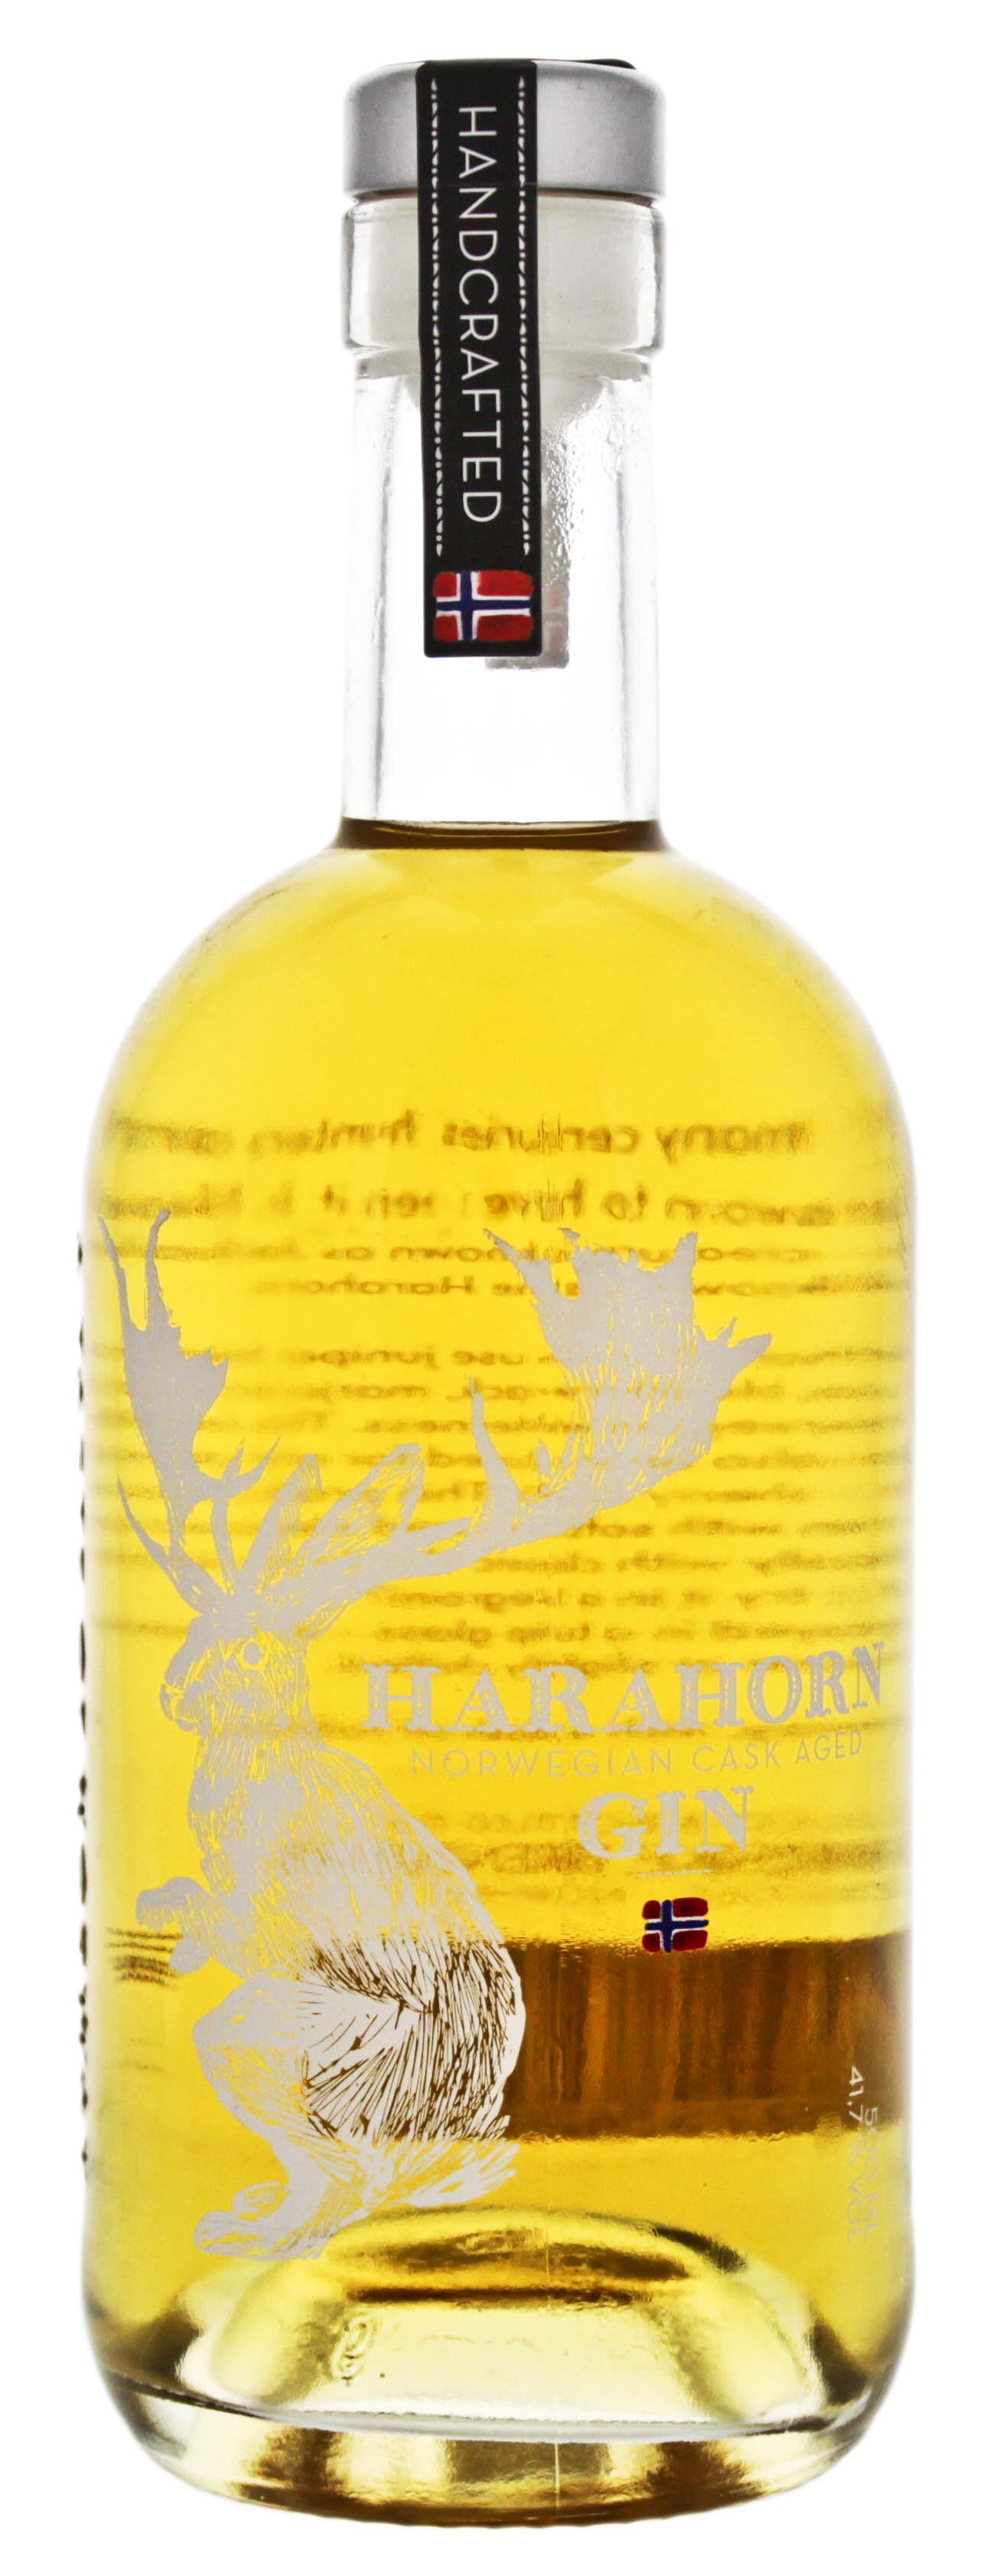 Harahorn Cask Aged Gin 0,5L